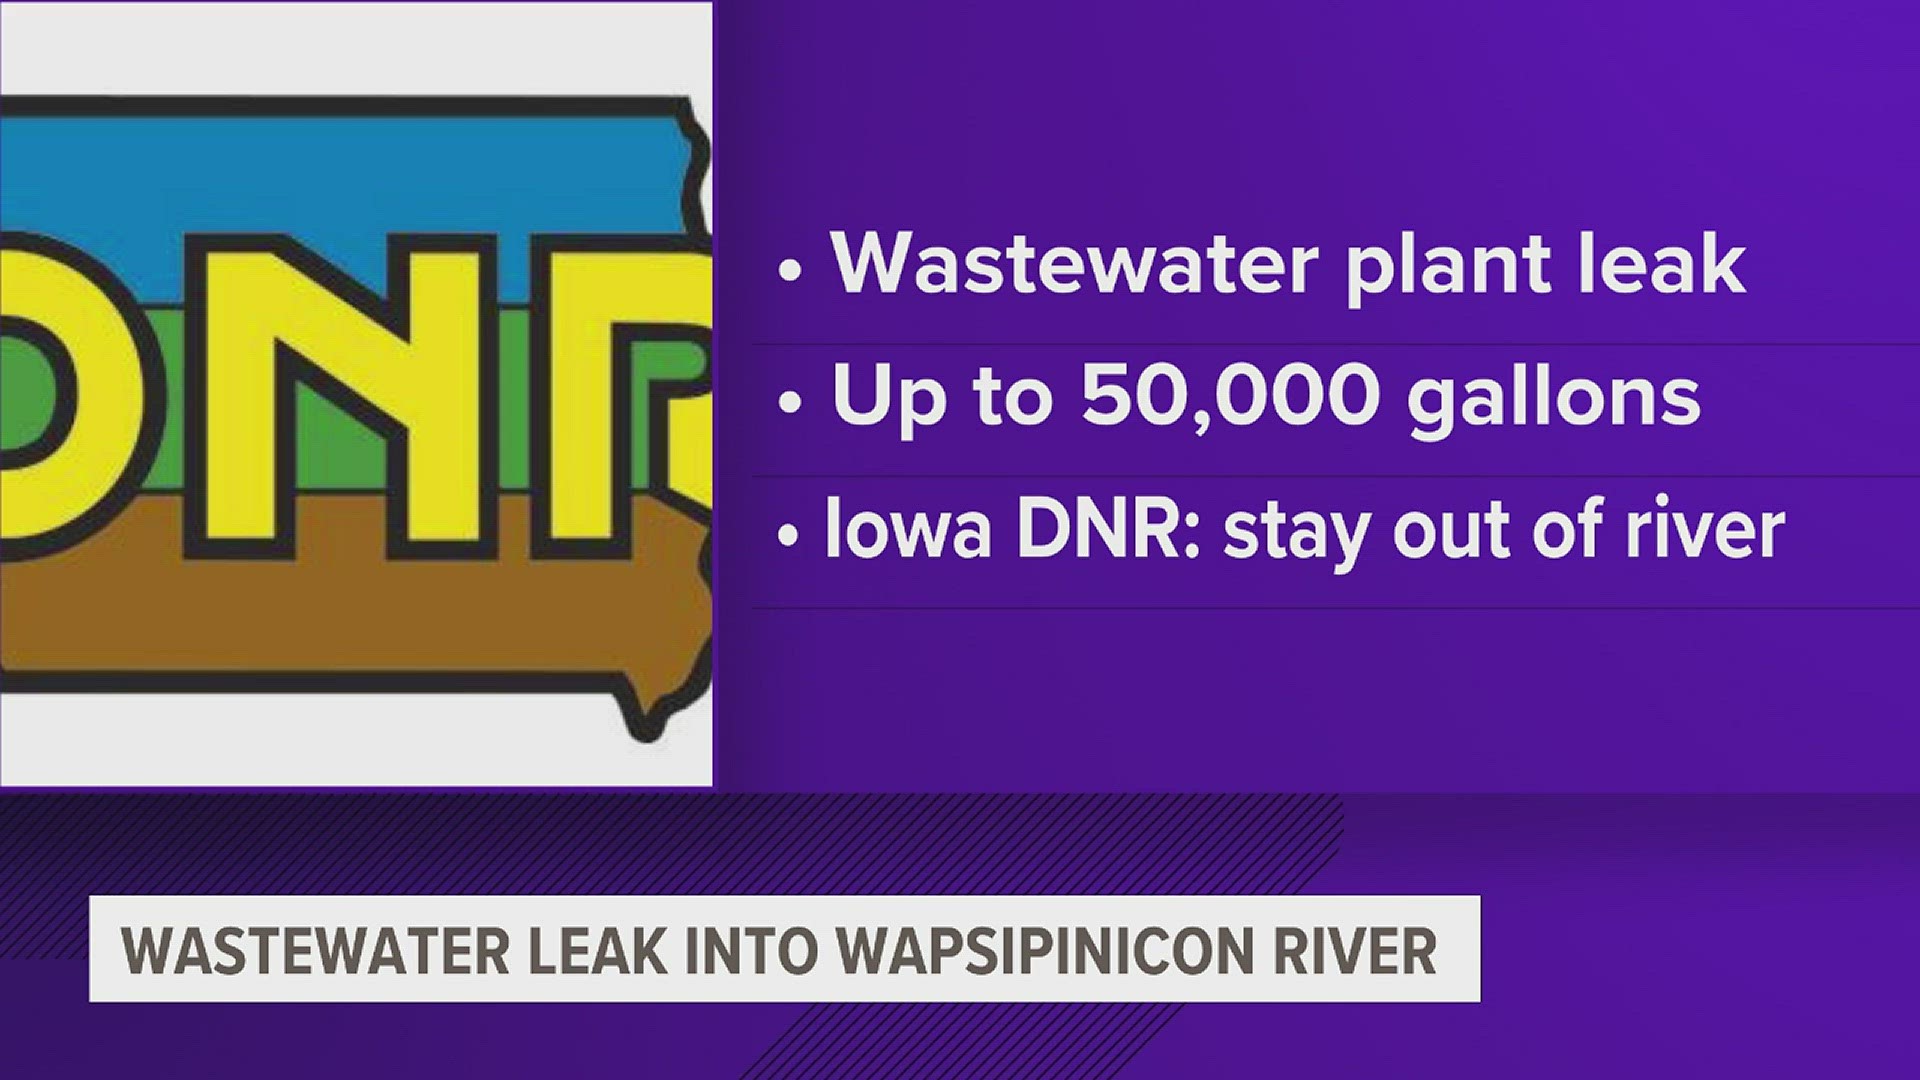 The Iowa DNR believes that around 50,000 gallons of untreated sewage spilled into a storm drain leading to the Wapsipinicon River.